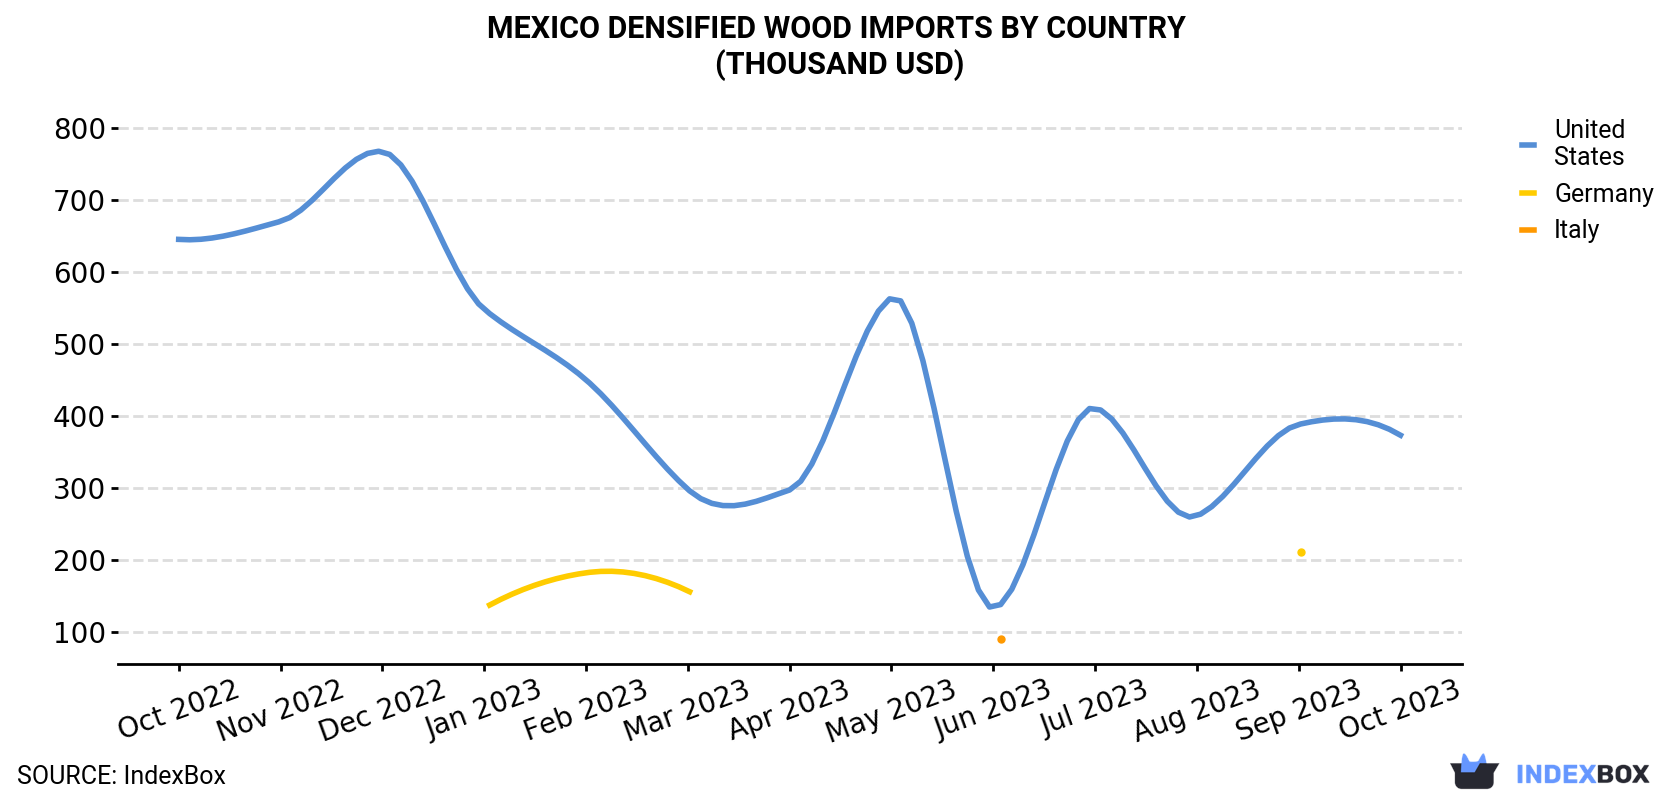 Mexico Densified Wood Imports By Country (Thousand USD)